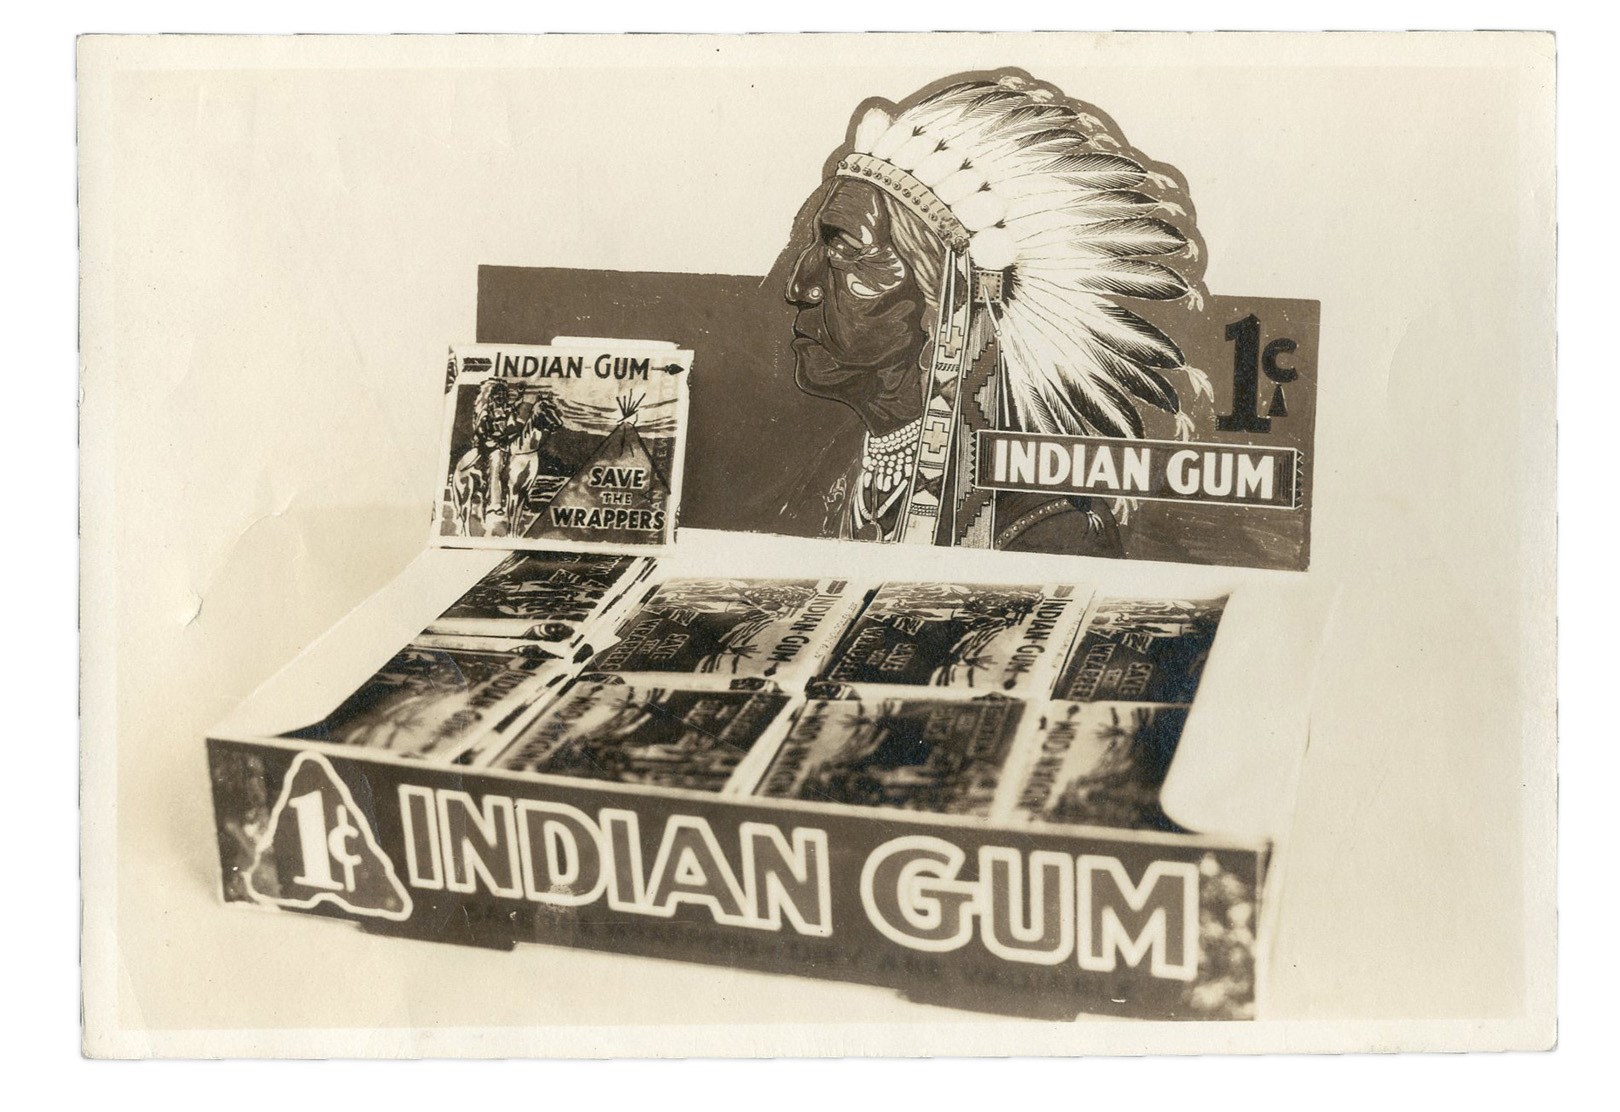 Baseball and Trading Cards - 1930s Indian Gum Original Picture of Wax Box - from the Goudey Files!